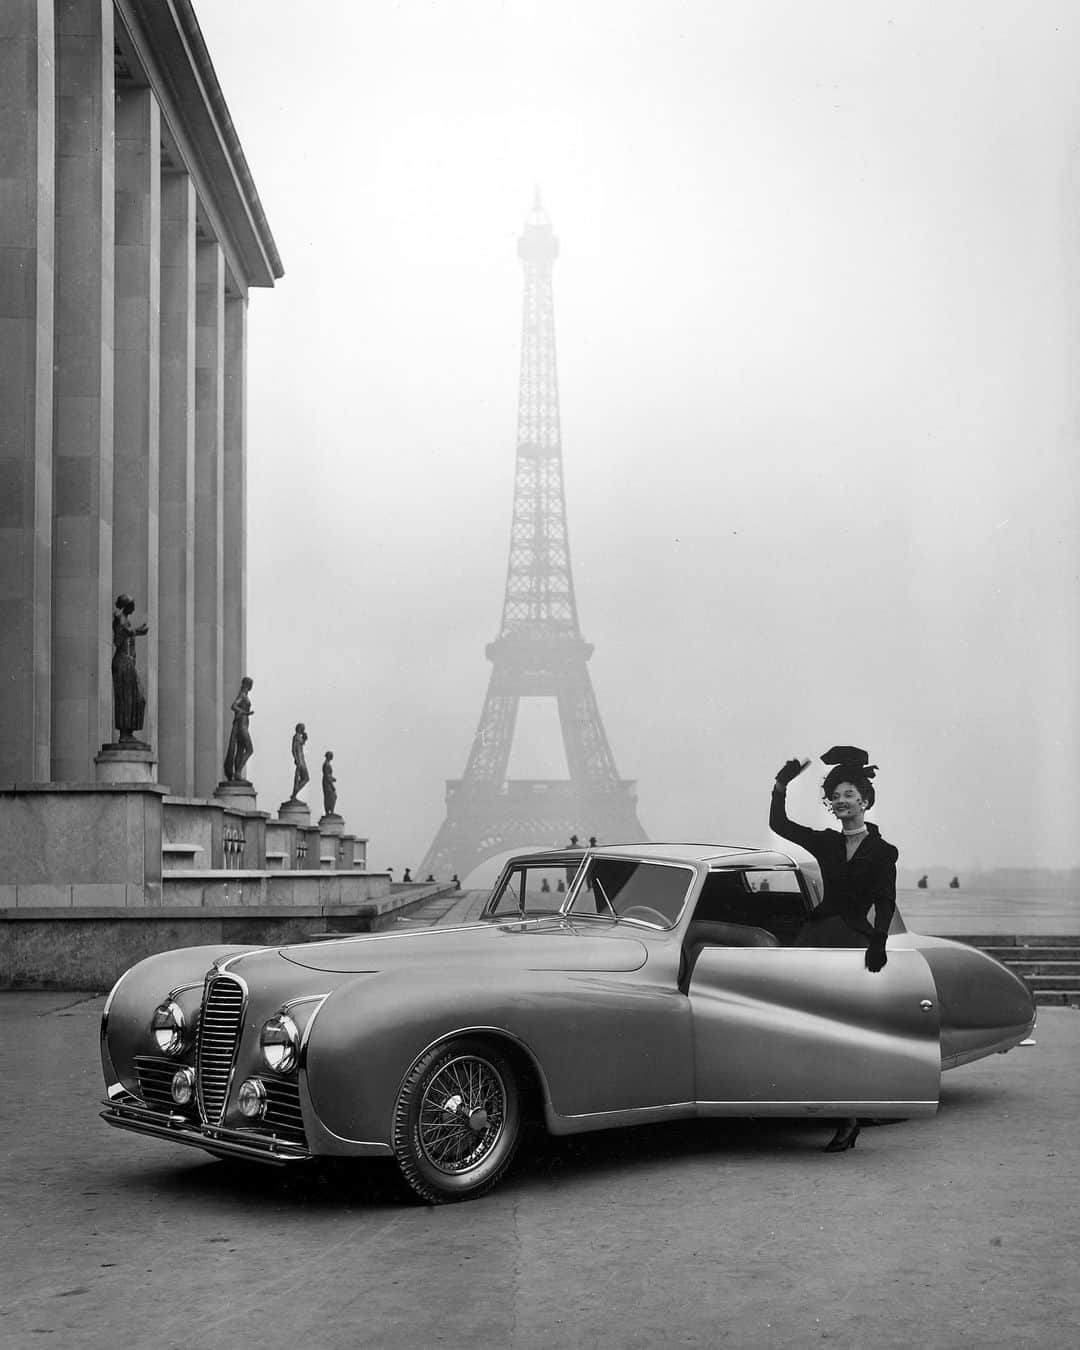 lifeのインスタグラム：「Model wearing a Jacques Fath ensemble posing beside 1947 model Delahaye automobile against the background of the Eiffel Tower.   (📷 Tony Linck/LIFE Picture Collection)   #LIFEMagazine #LIFEArchive #1940s #ParisFrance #EiffelTower #JacquesFath #Delahaye #Fashion」